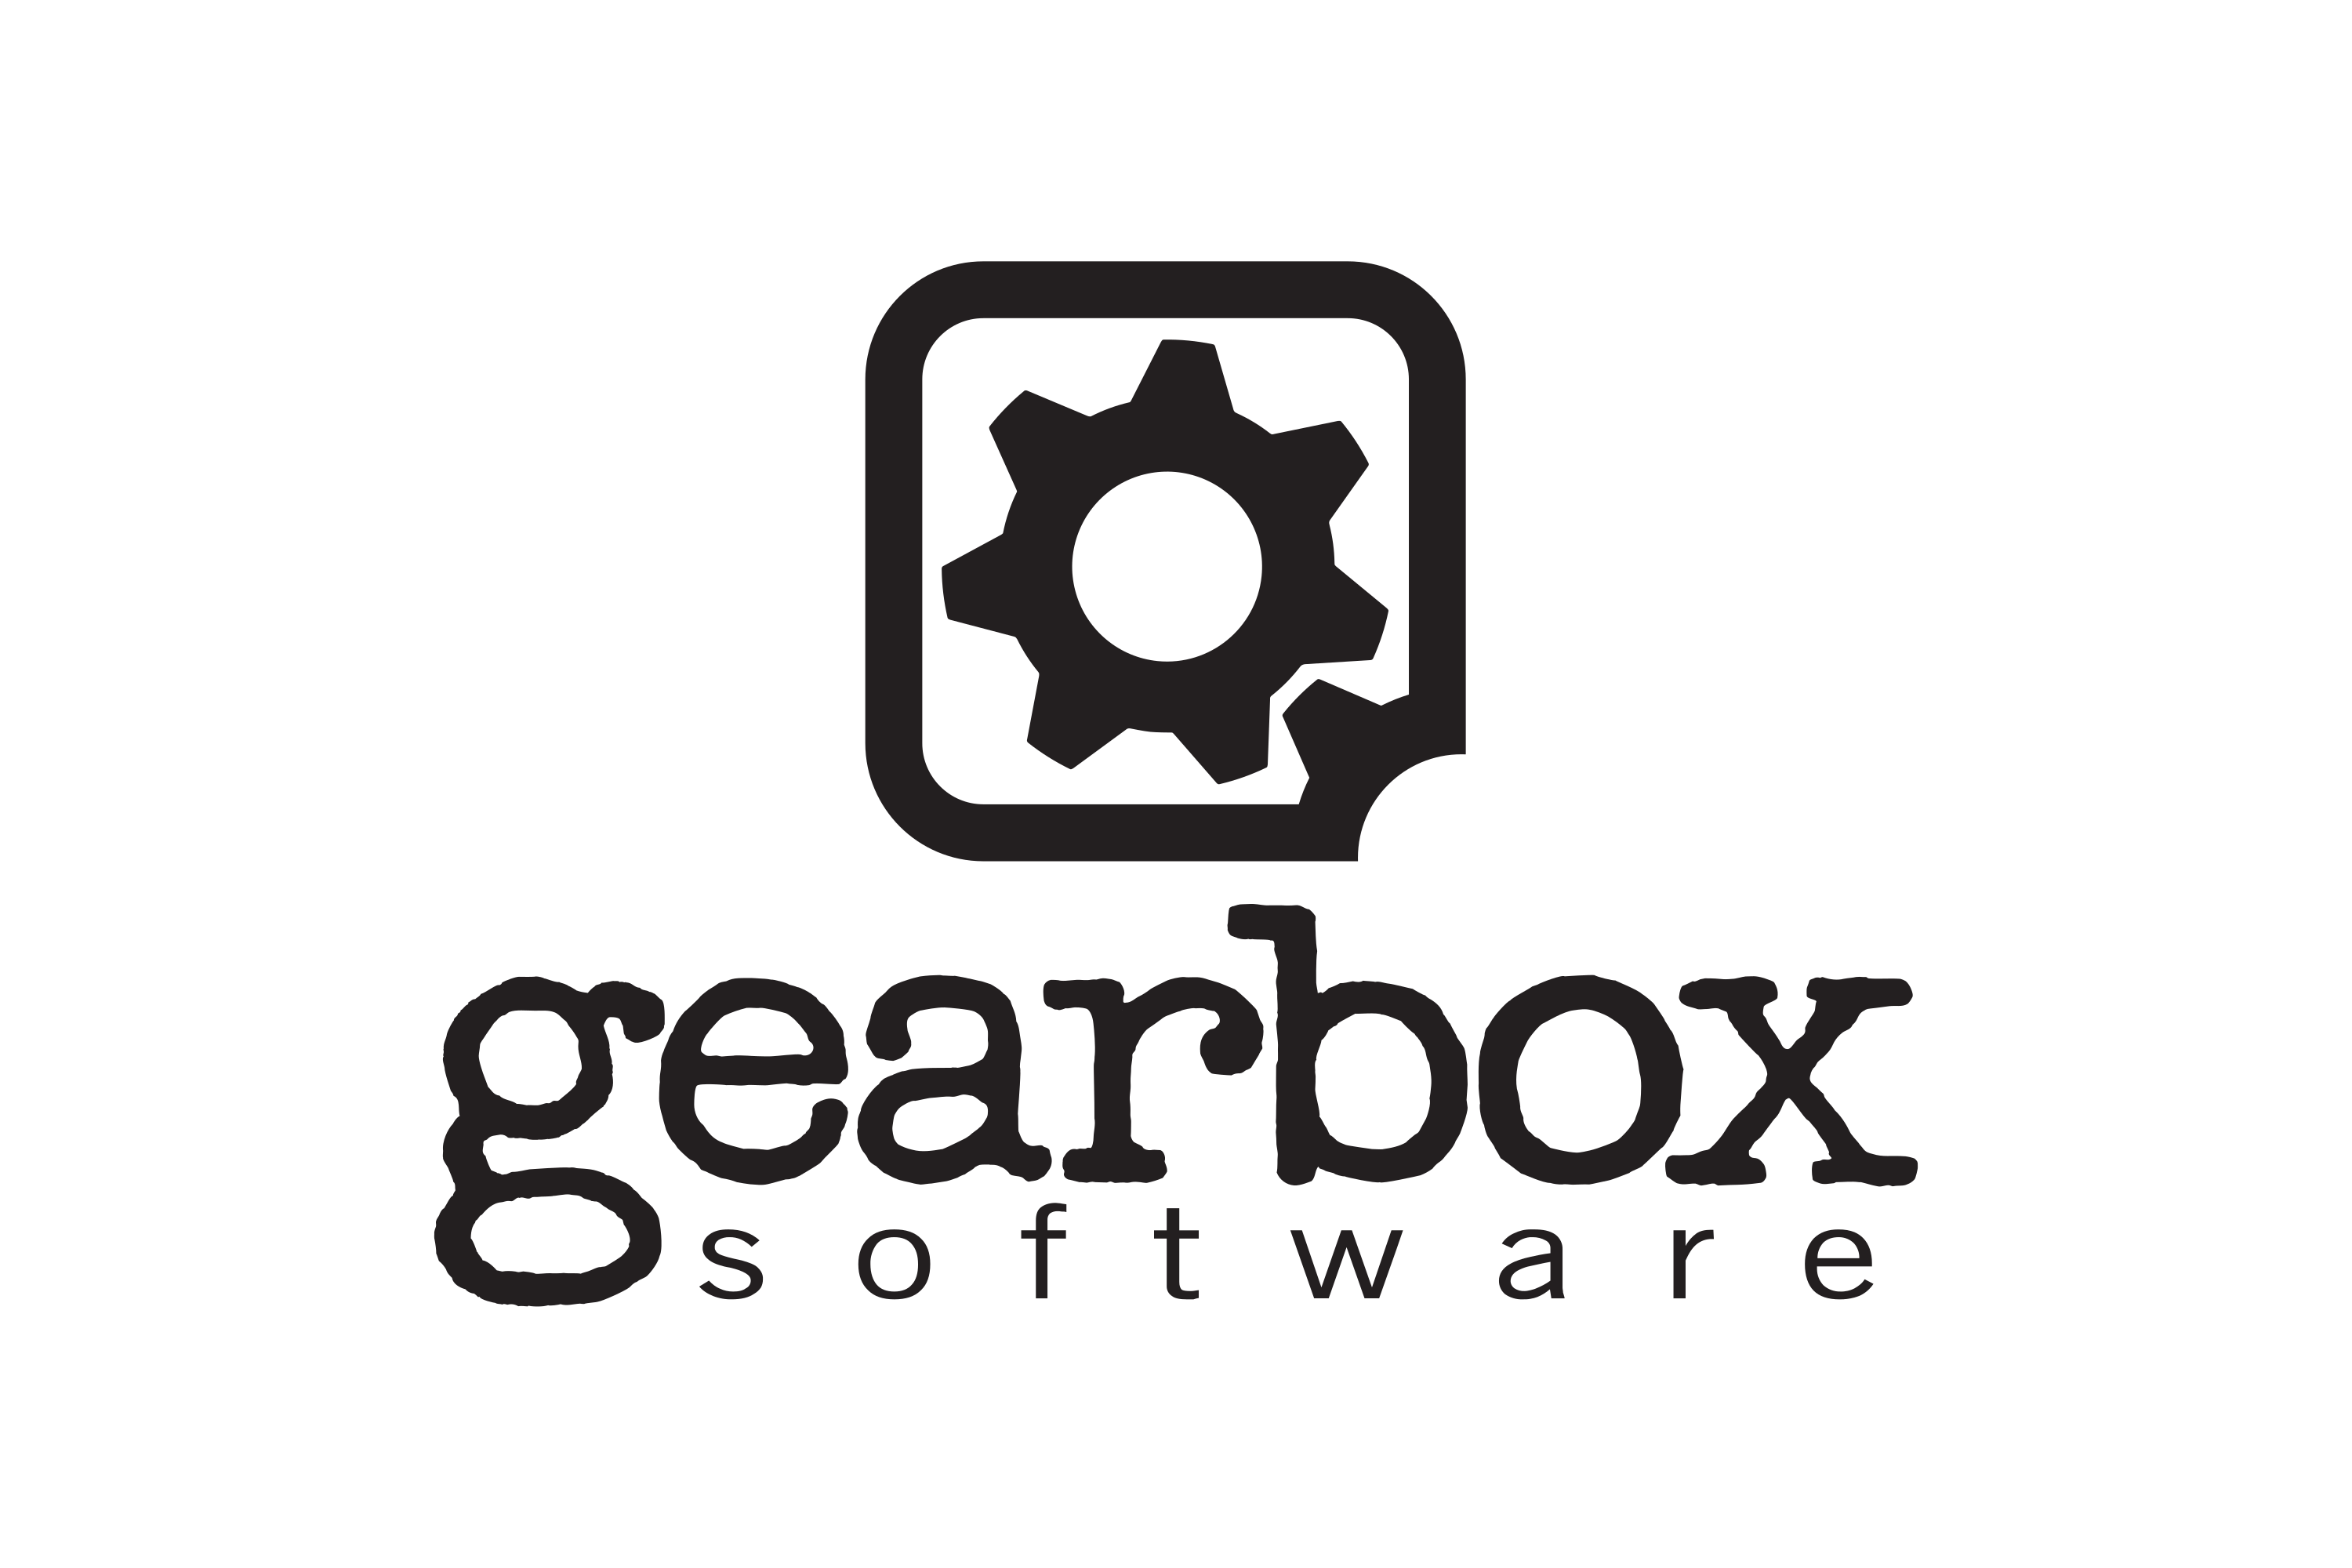 Download Gearbox Software Logo in SVG Vector or PNG File Format - Logo.wine